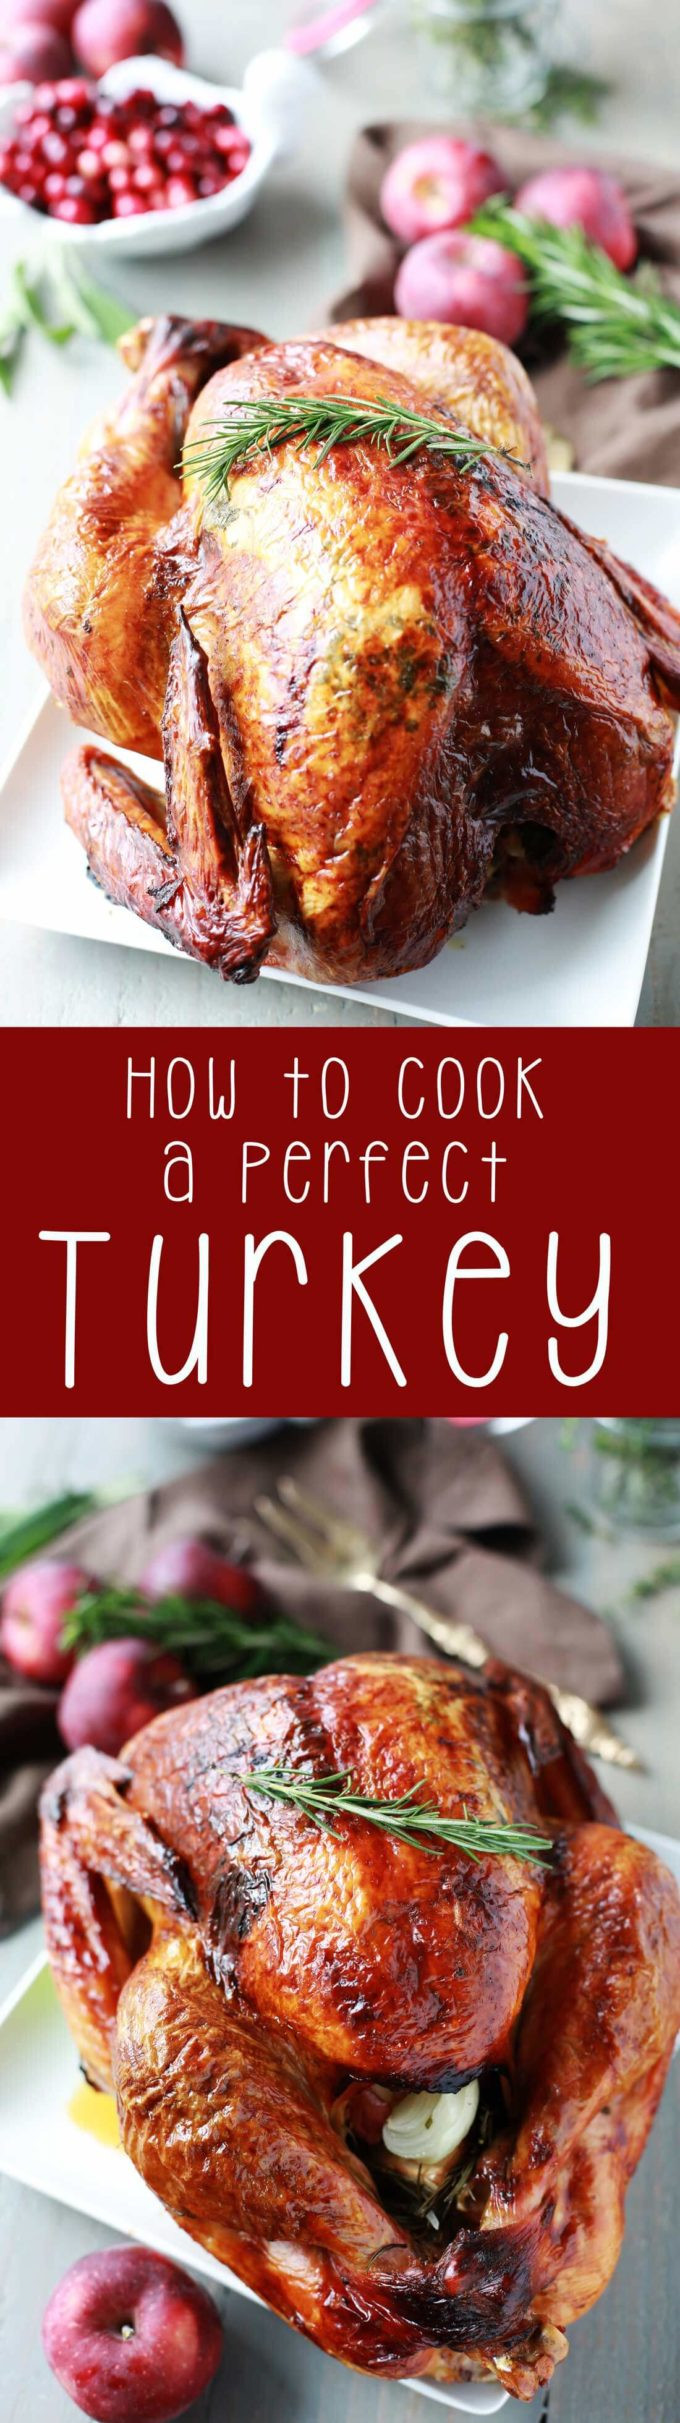 Prepare A Turkey For Thanksgiving
 How to Cook a Perfect Turkey Eazy Peazy Mealz